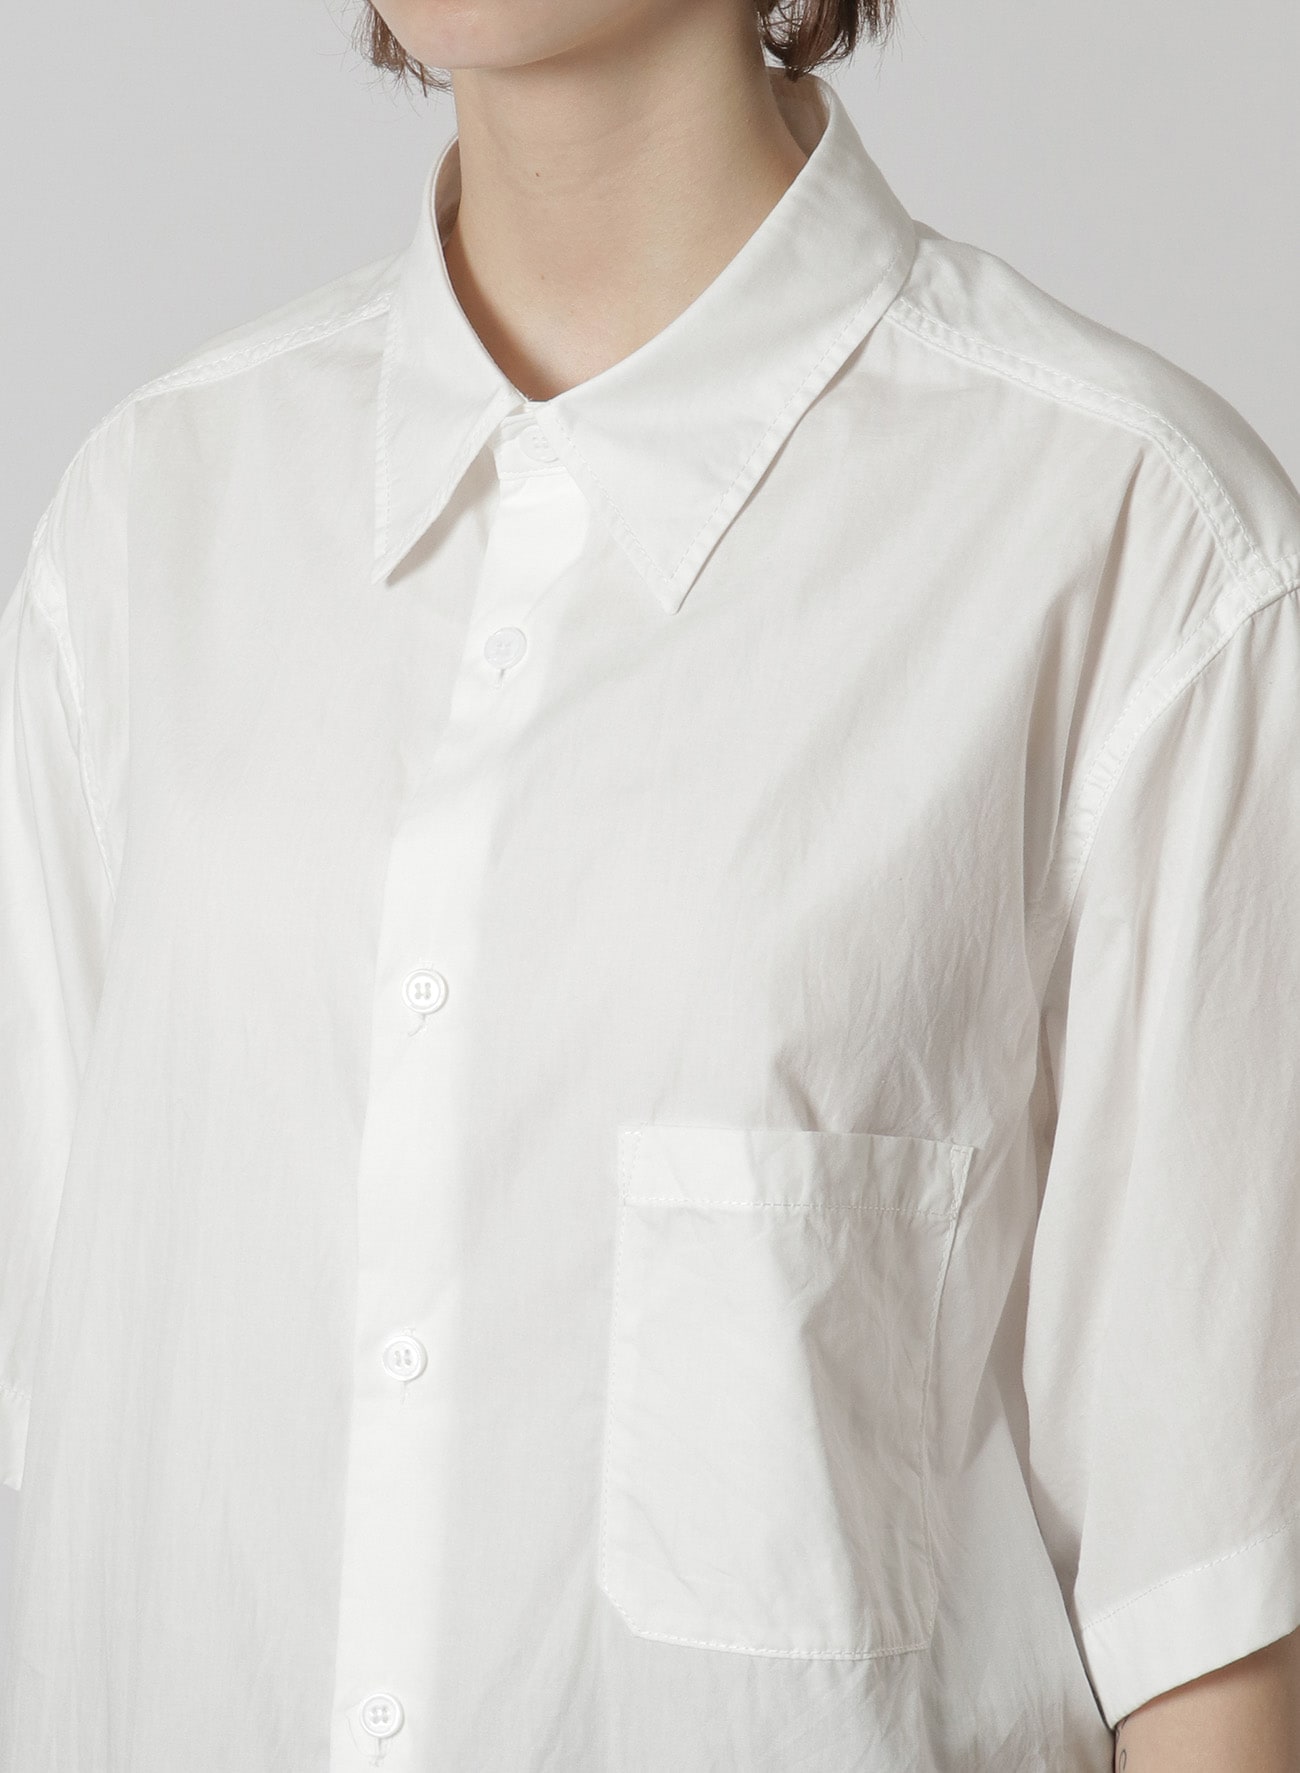 Y's-Black Name]COTTON STANDARD SHORT SLEEVE SHIRT(S White): Y's 